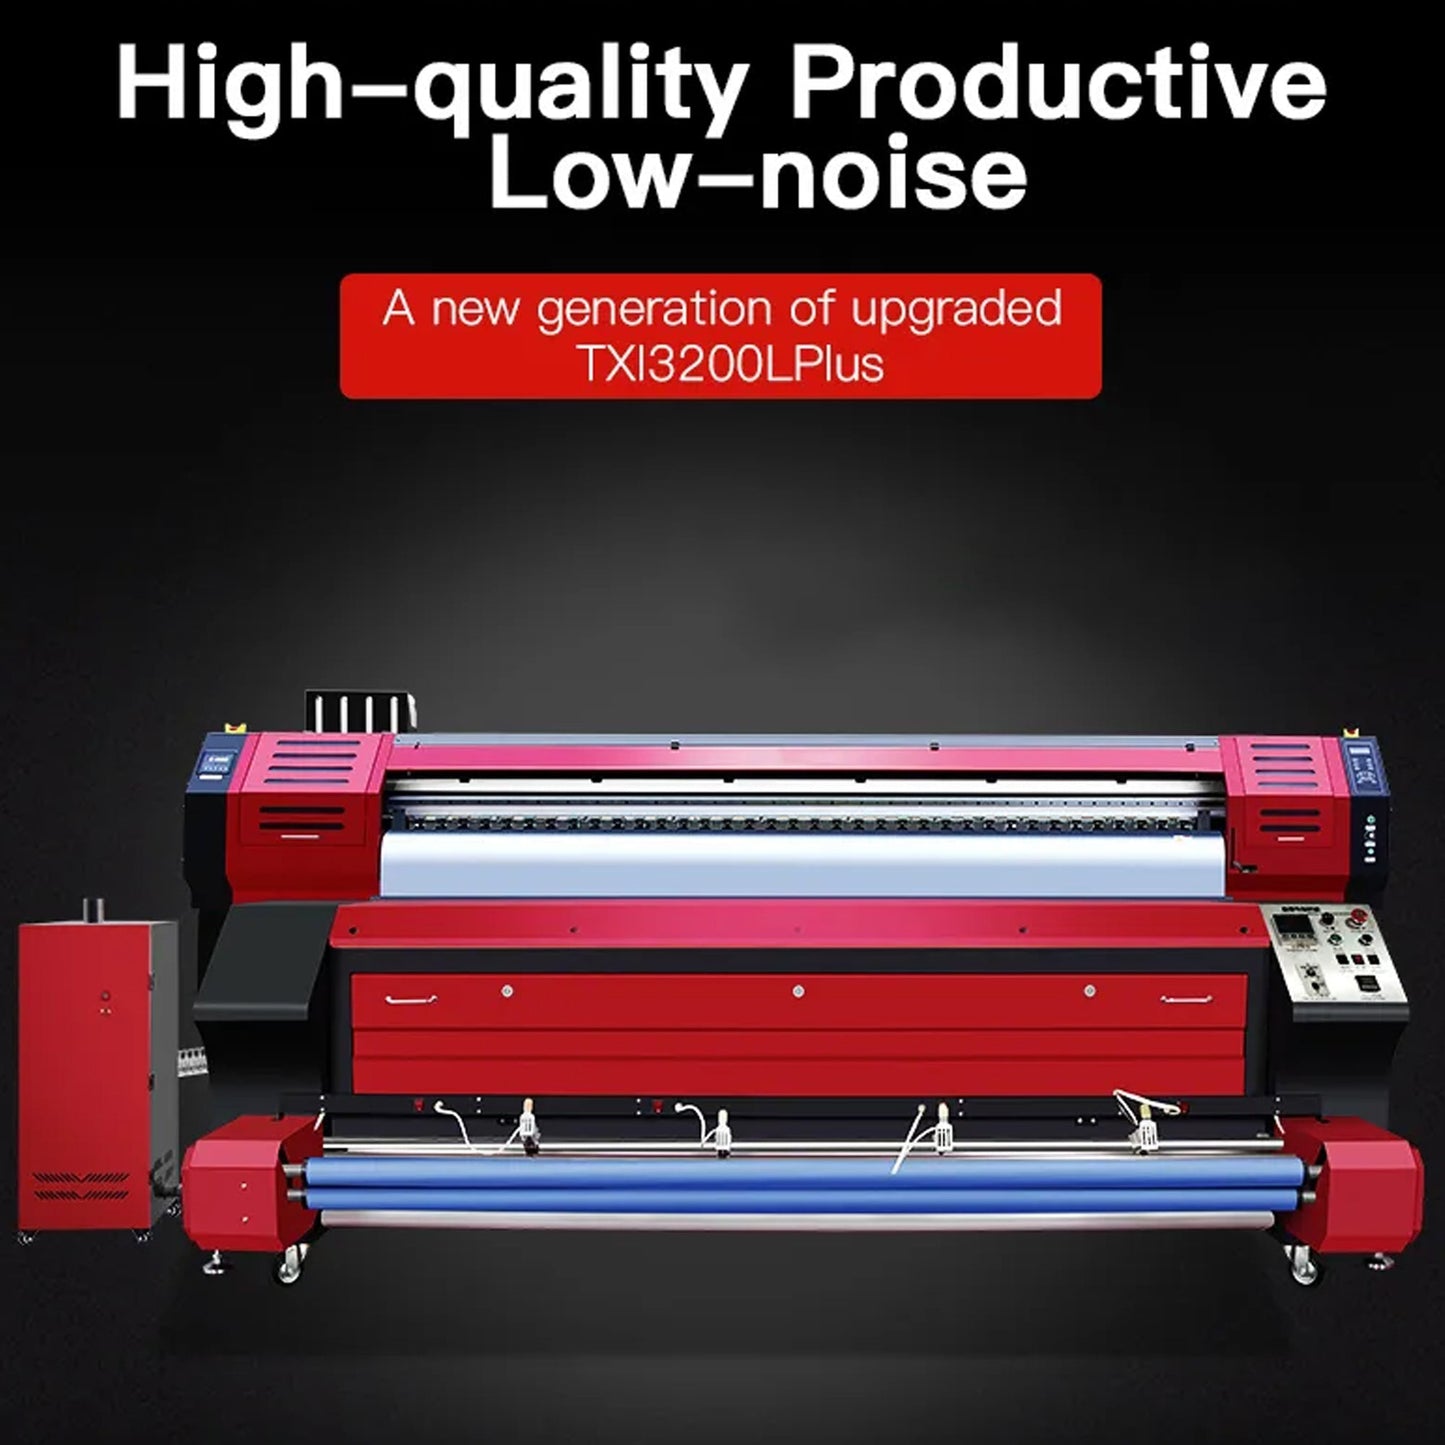 High Efficient Digital Cotton Fabric Printer is an automated grading solution, offering advanced capabilities for direct textile printing on cotton fabrics.